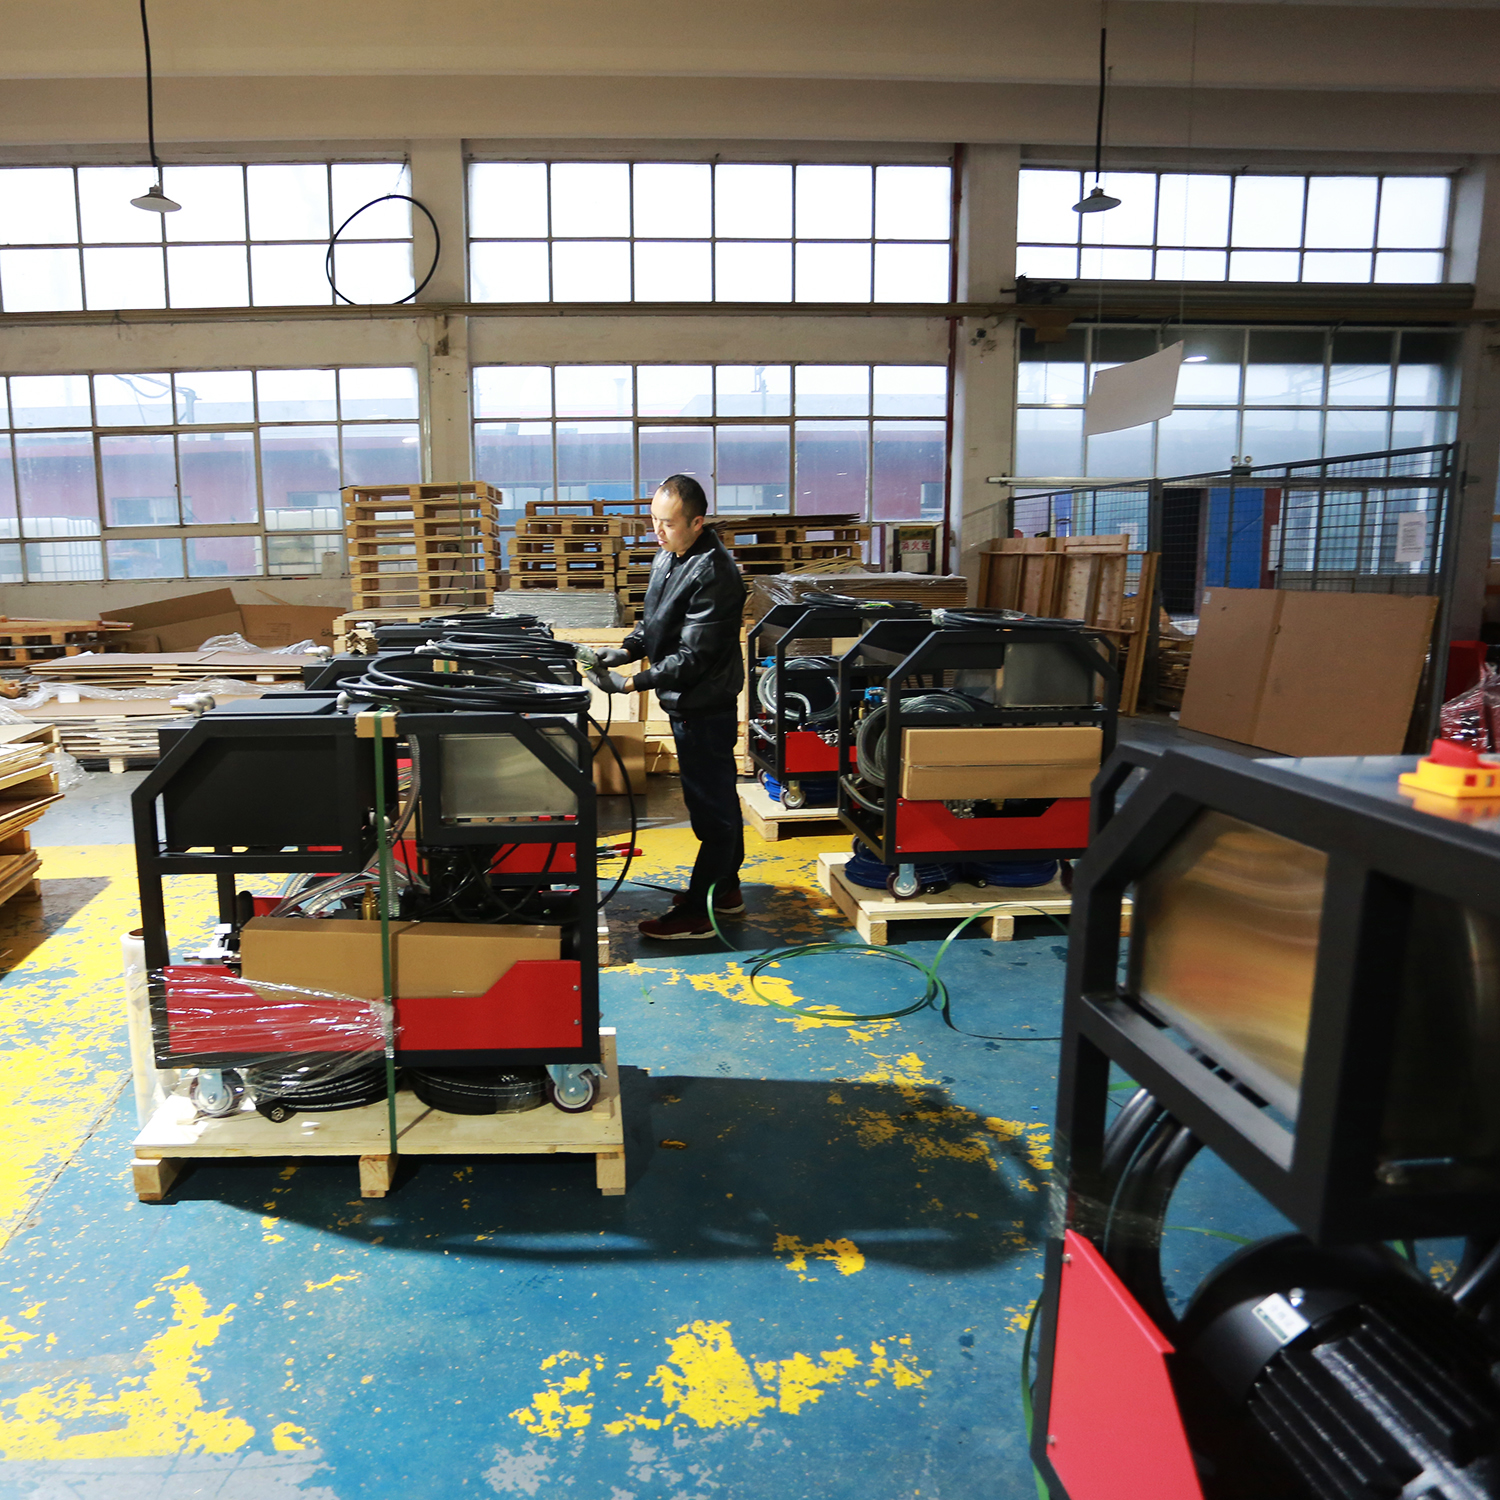 Workers efficiently assemble high-pressure washers on the production line, adhering to rigorous standards.